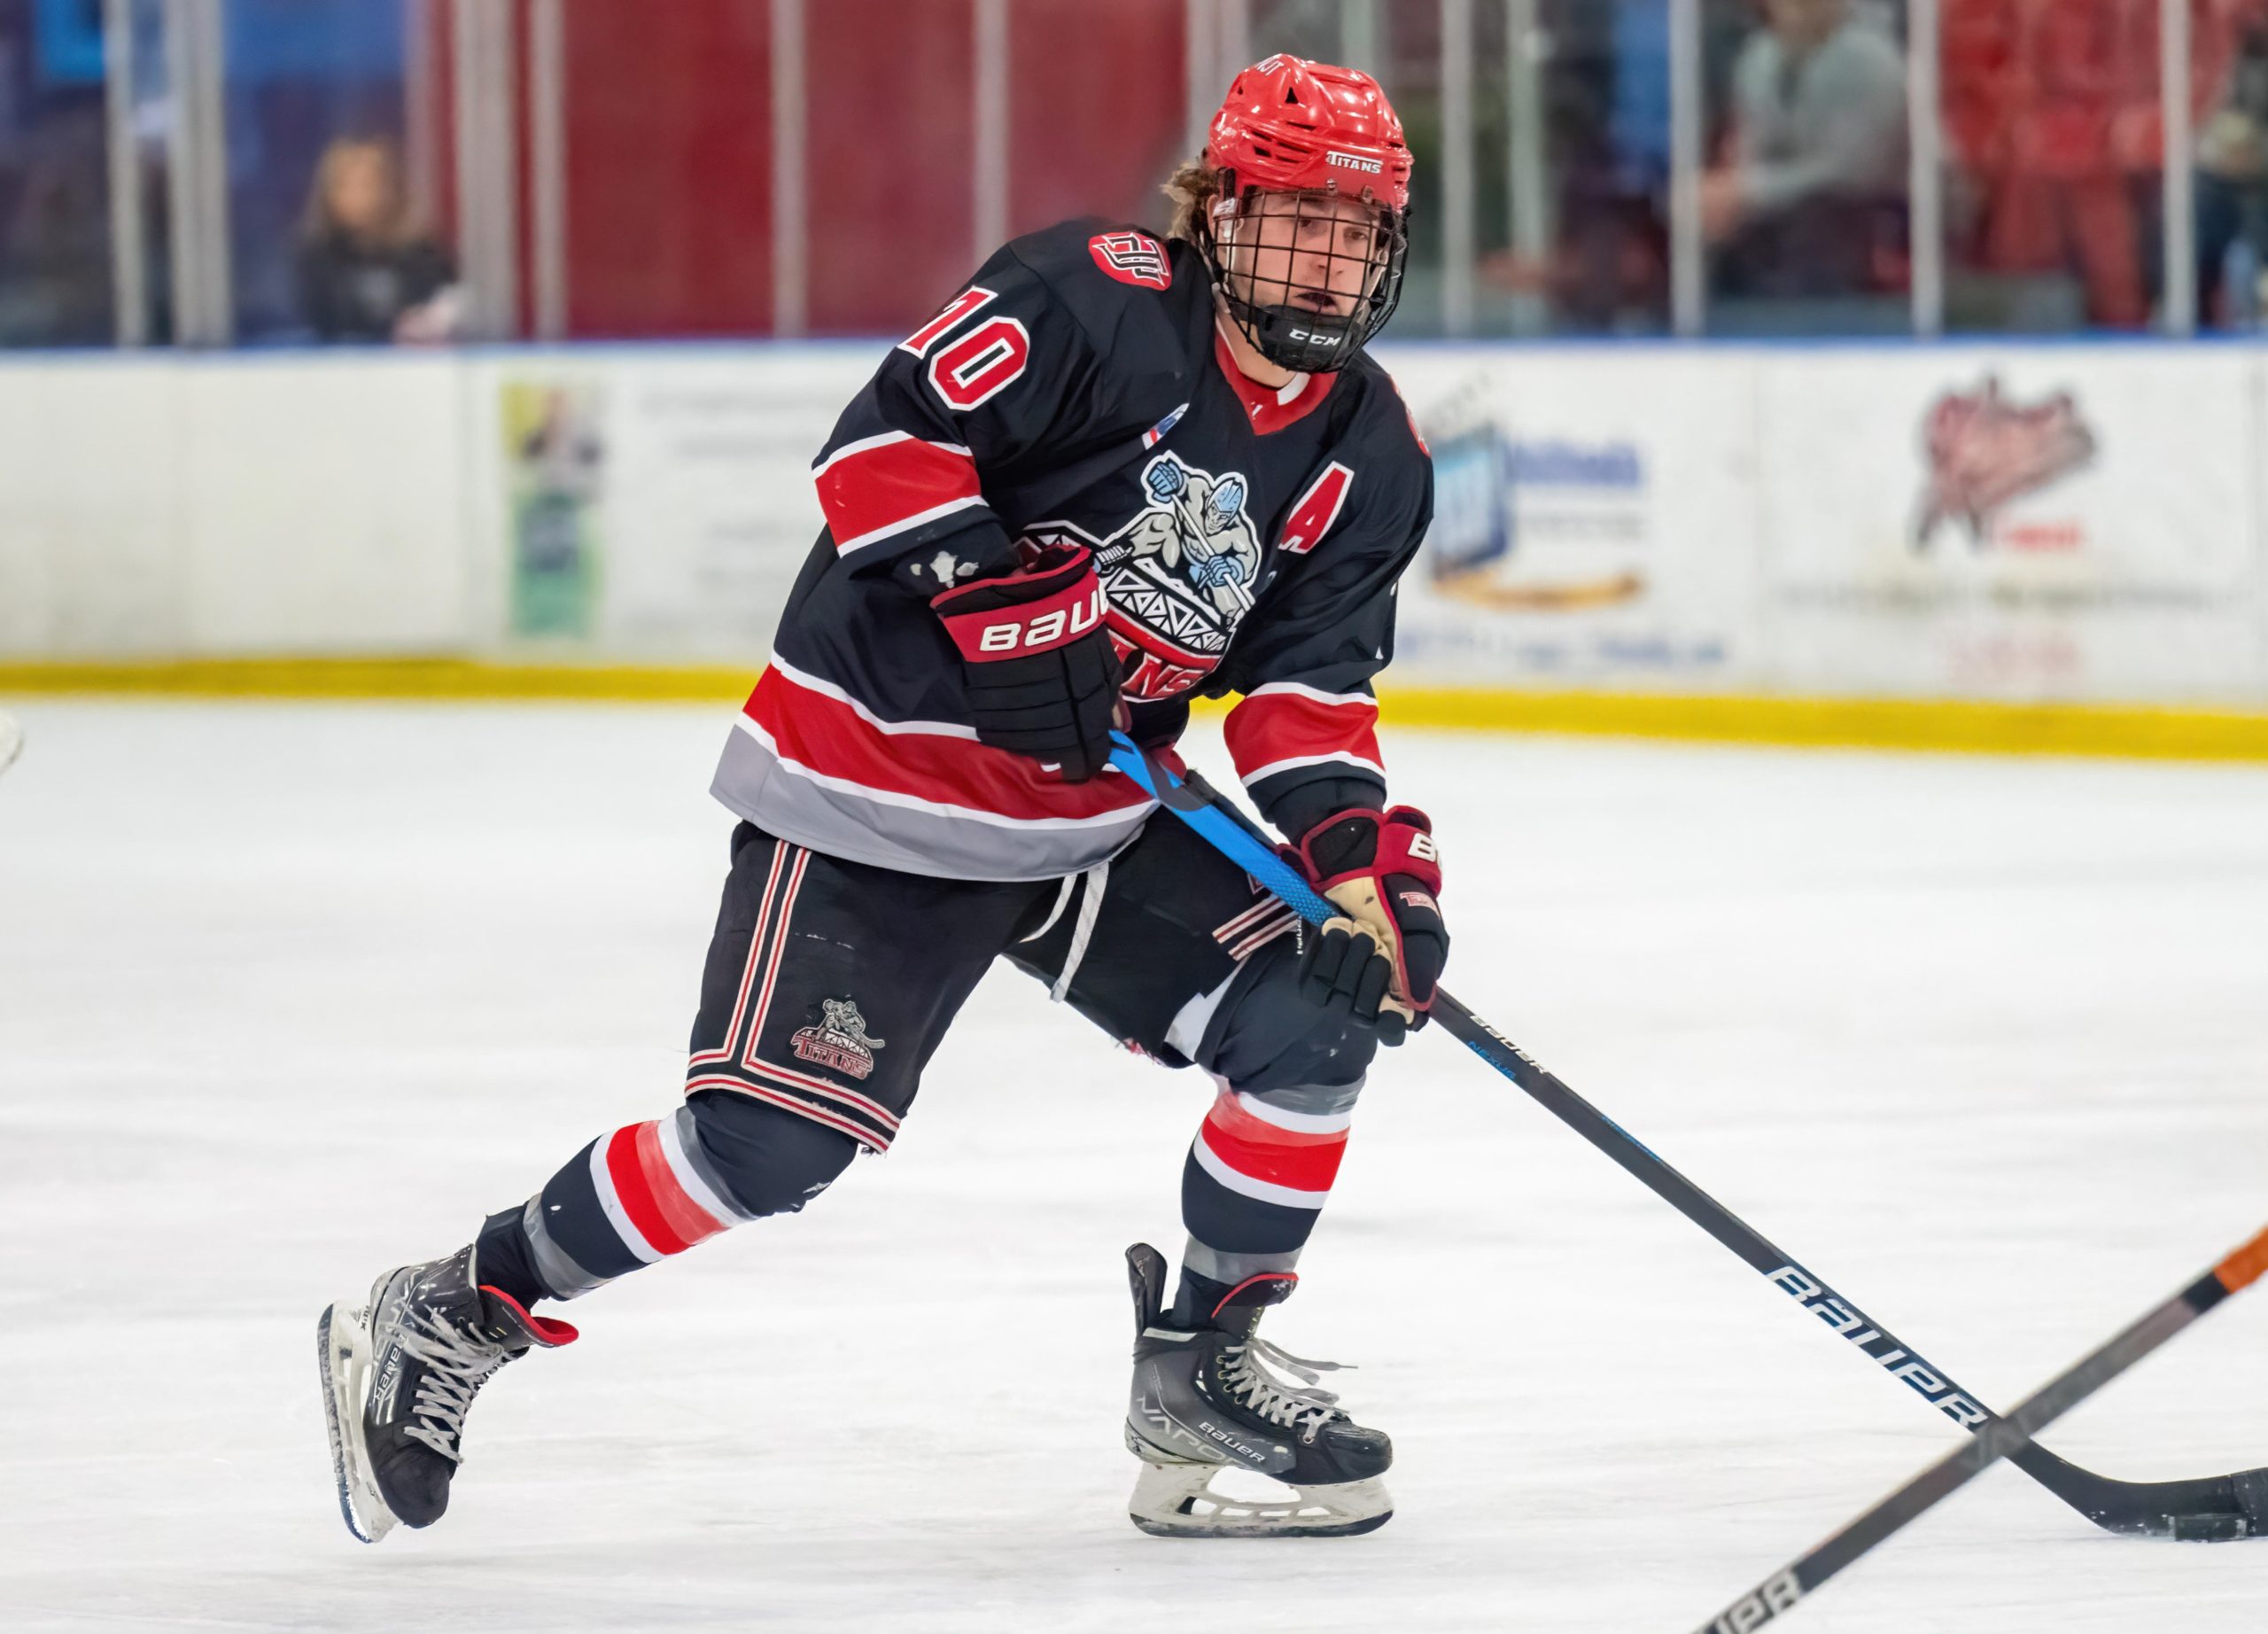 Titans Forward Tommy Bannister makes NCAA D1 commitment to Mercyhurst